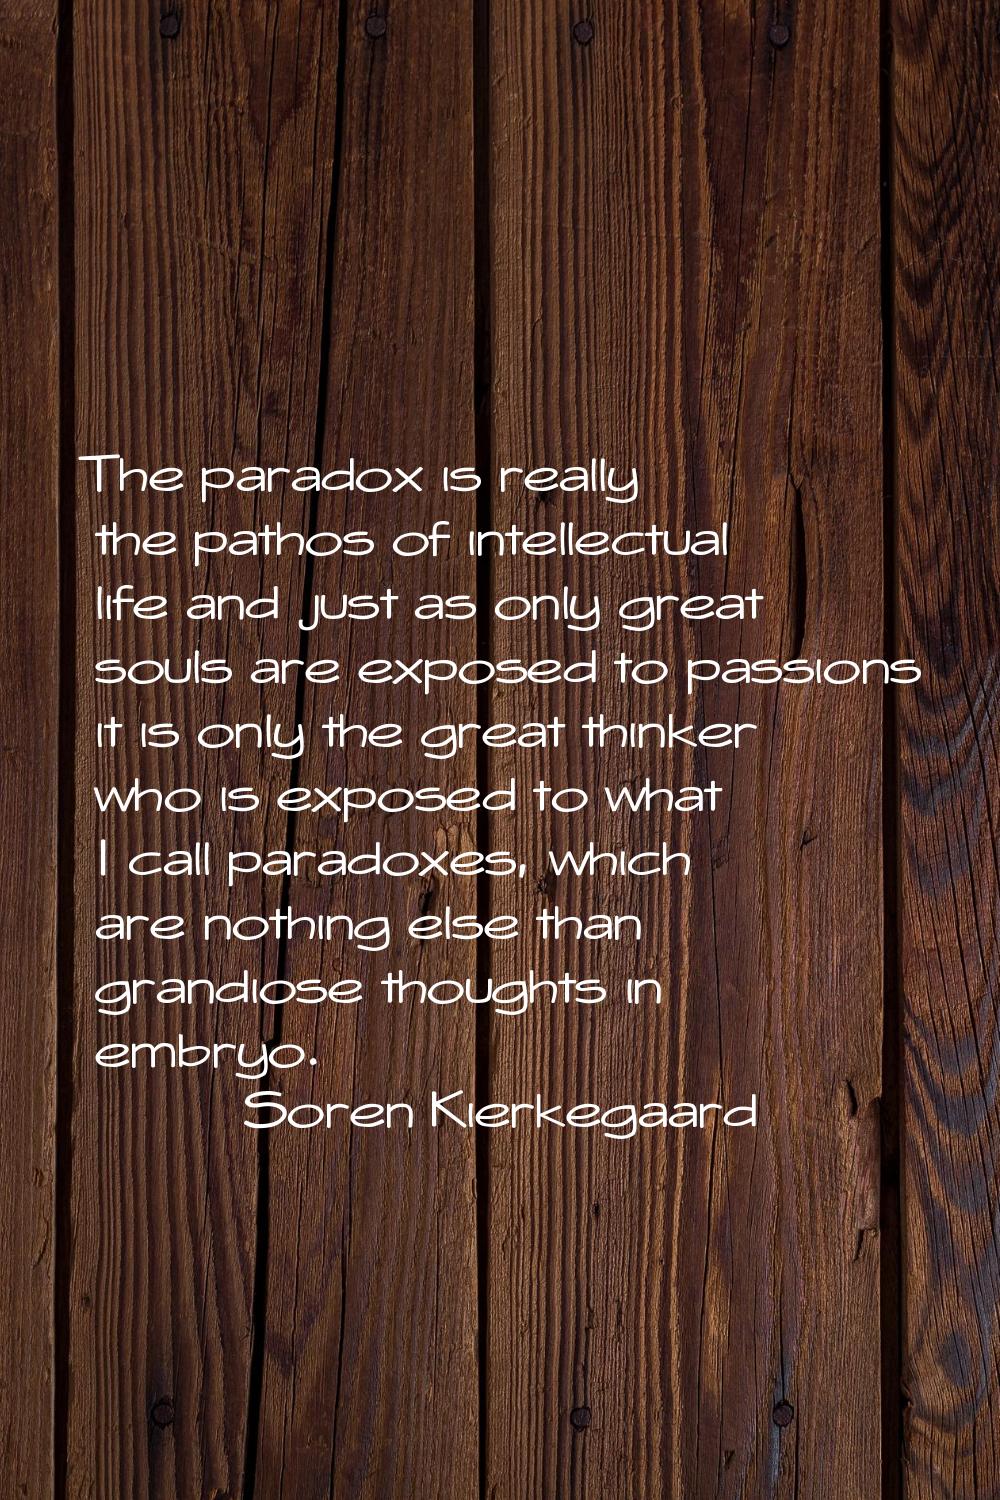 The paradox is really the pathos of intellectual life and just as only great souls are exposed to p